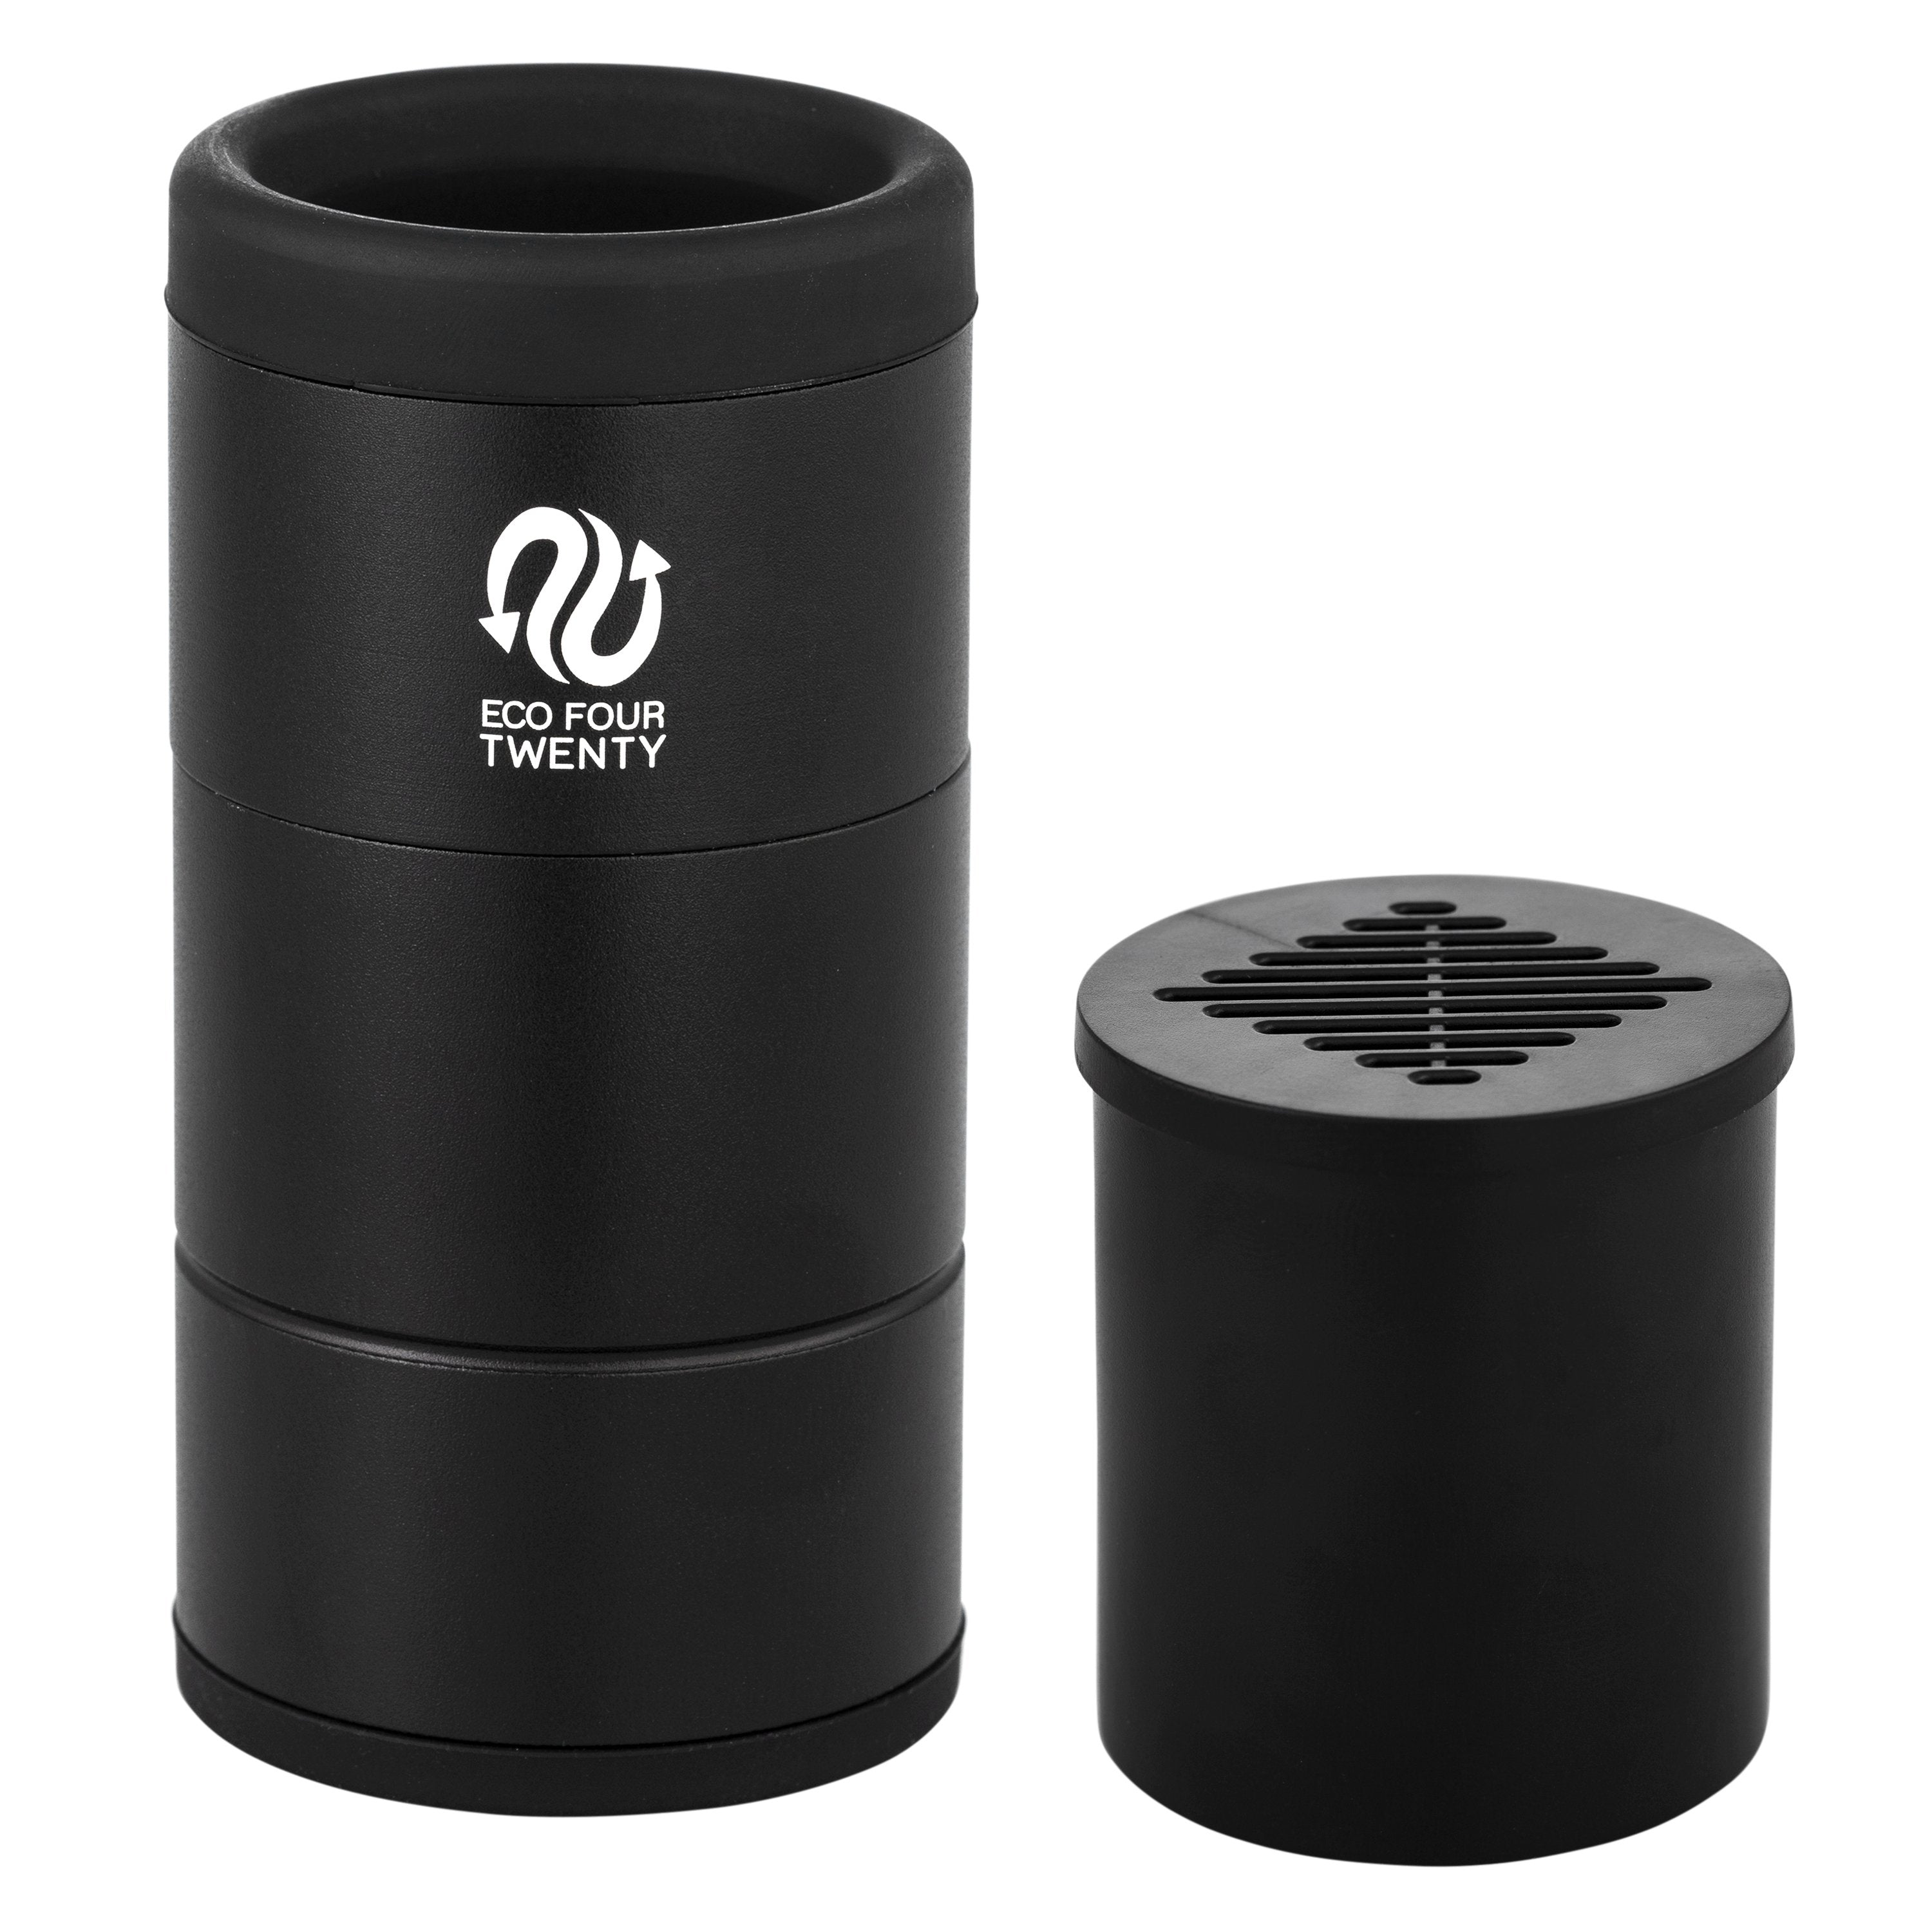 Personal Air Filter - Has a Replaceable Cartridge System!